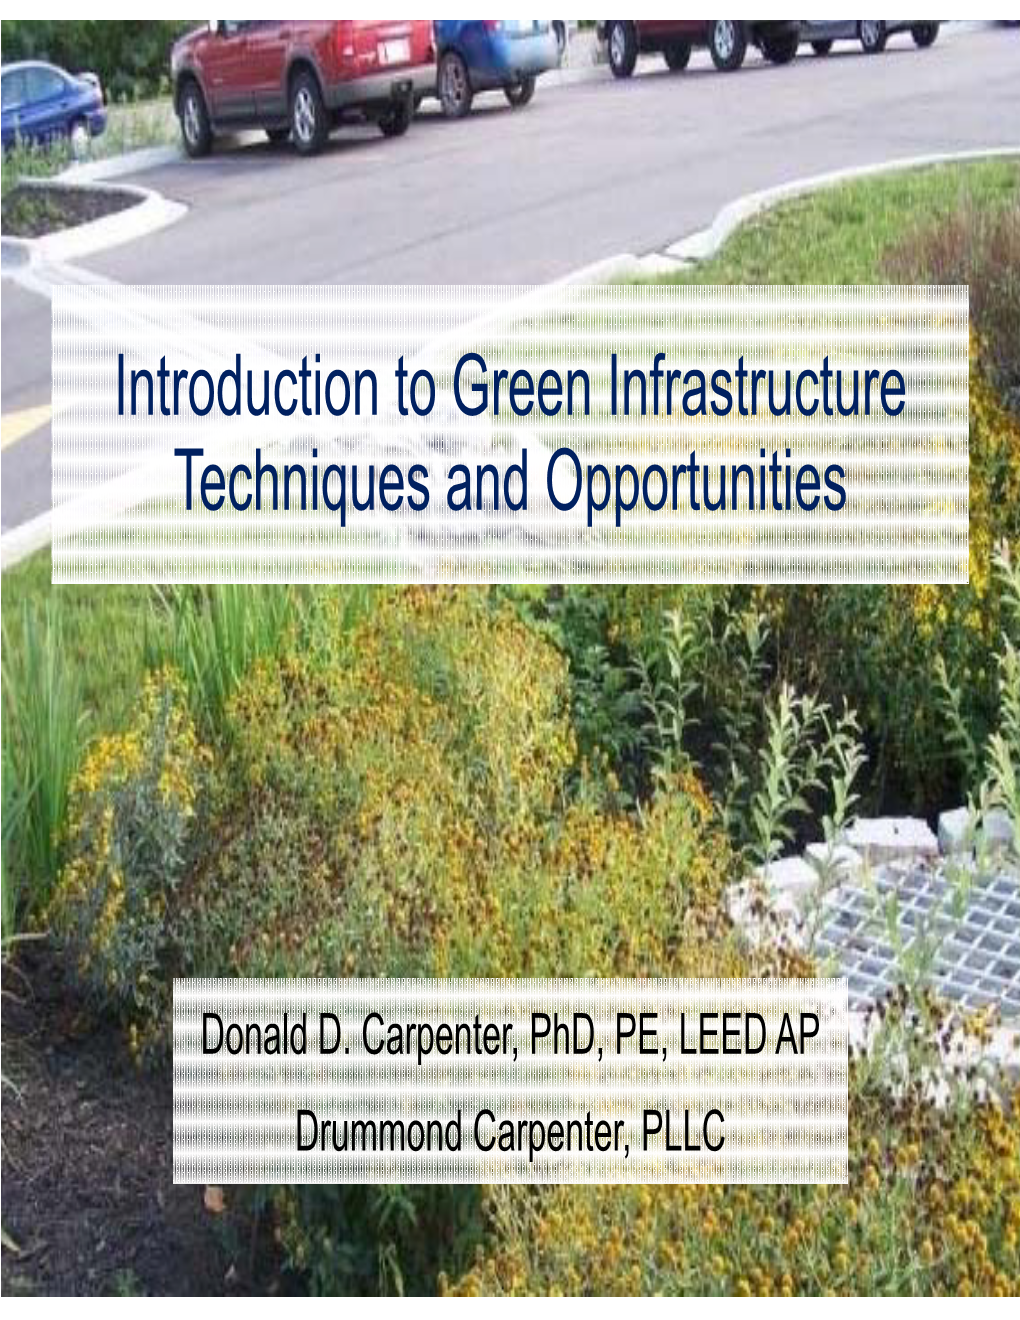 Introduction to Green Infrastructure Techniques and Opportunities